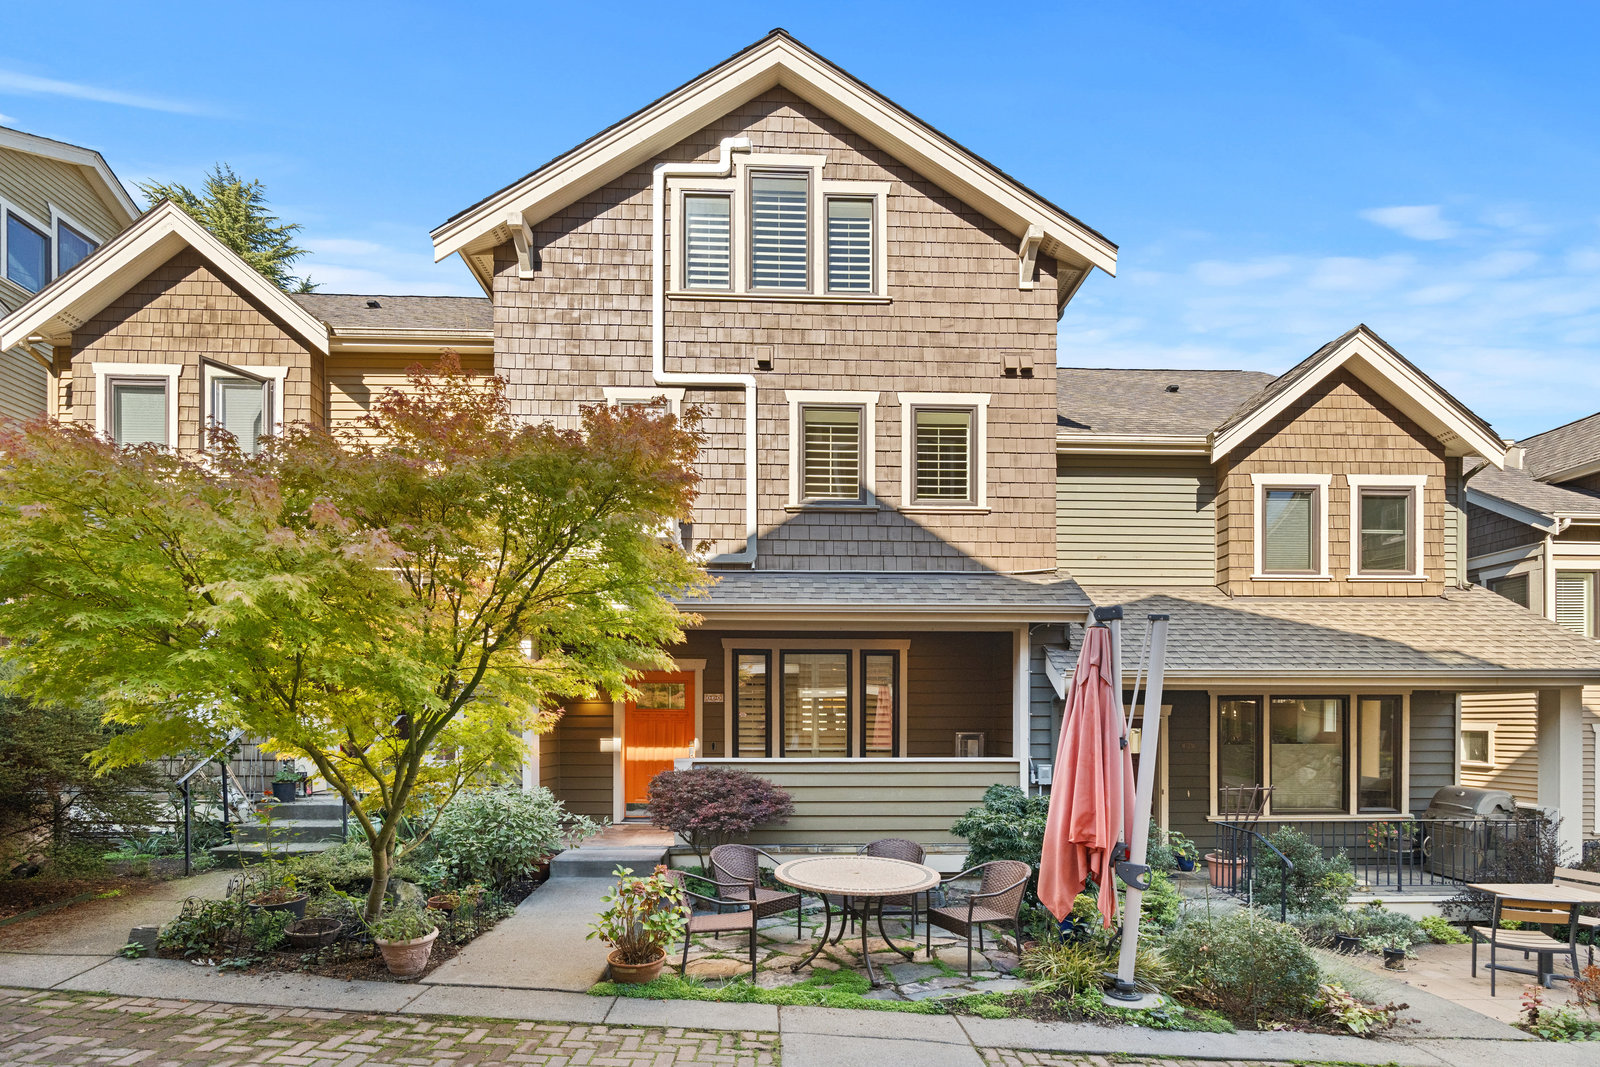 PICTURE-PERFECT QUEEN ANNE TOWNHOME